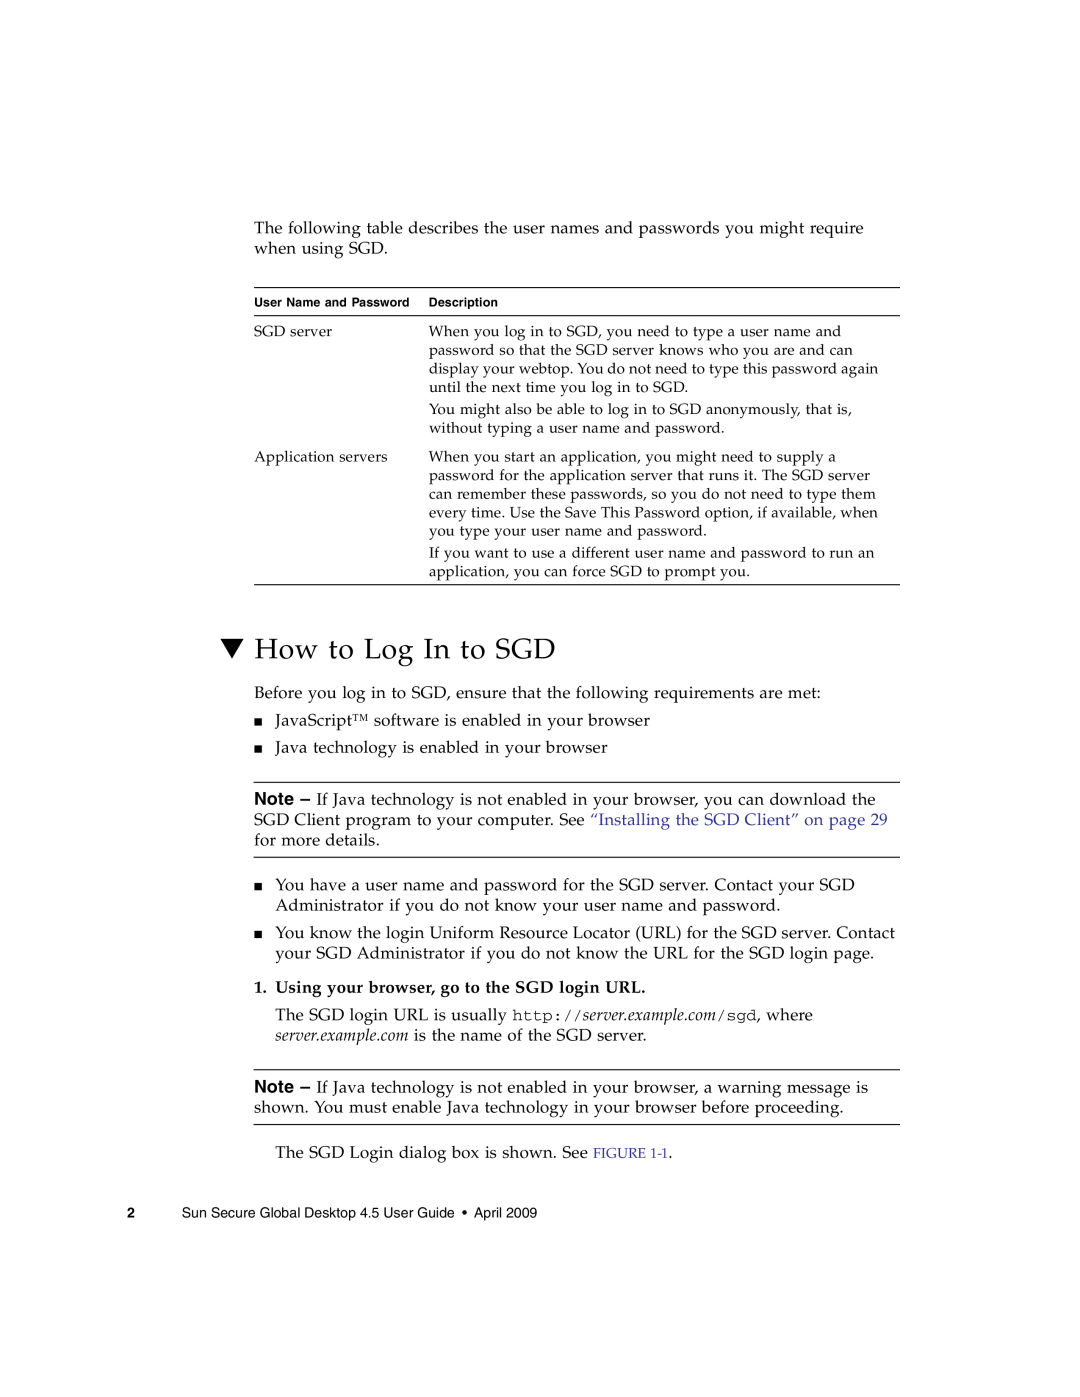 Sun Microsystems 4.5 manual How to Log In to SGD, Using your browser, go to the SGD login URL 